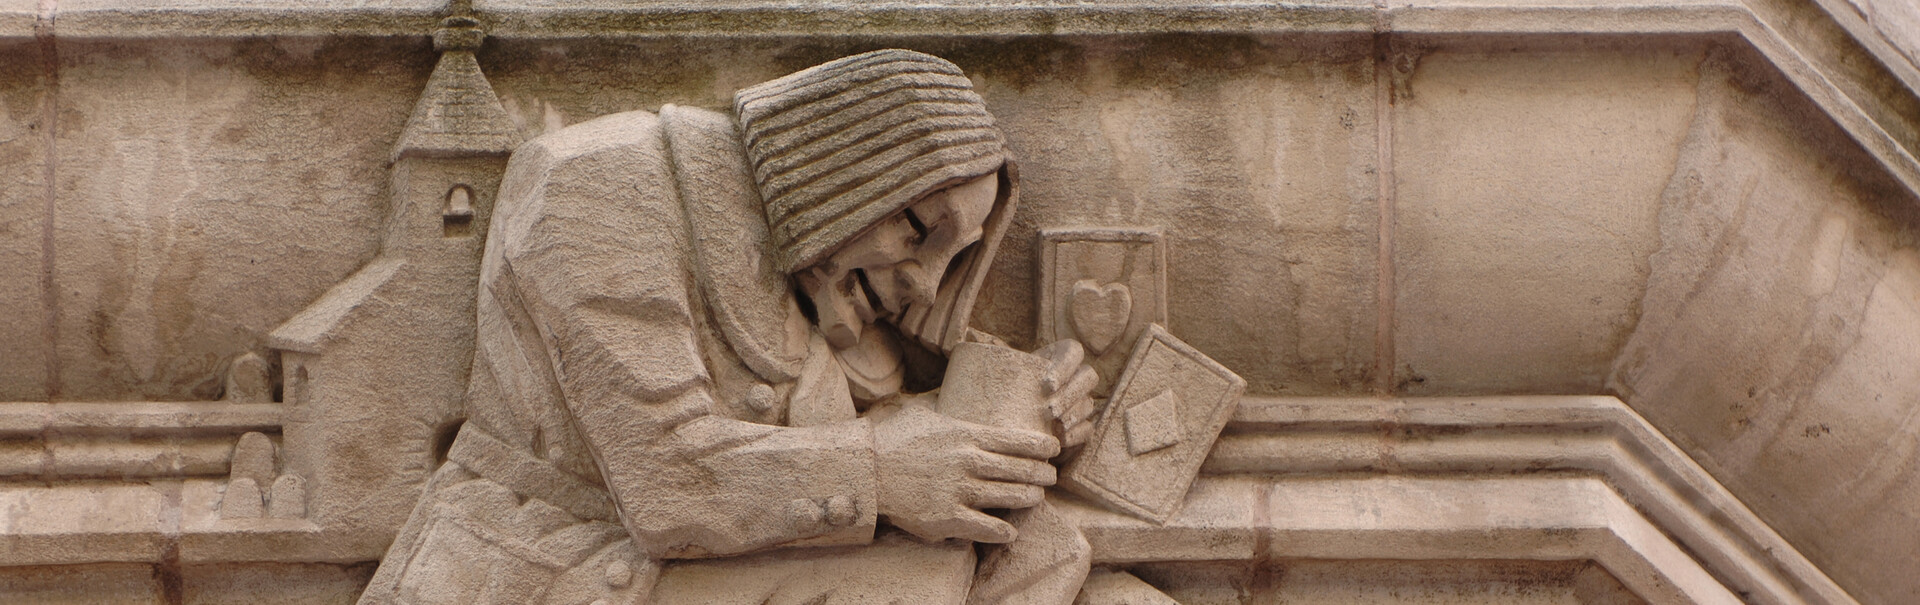 stonework detail of a man playing cards